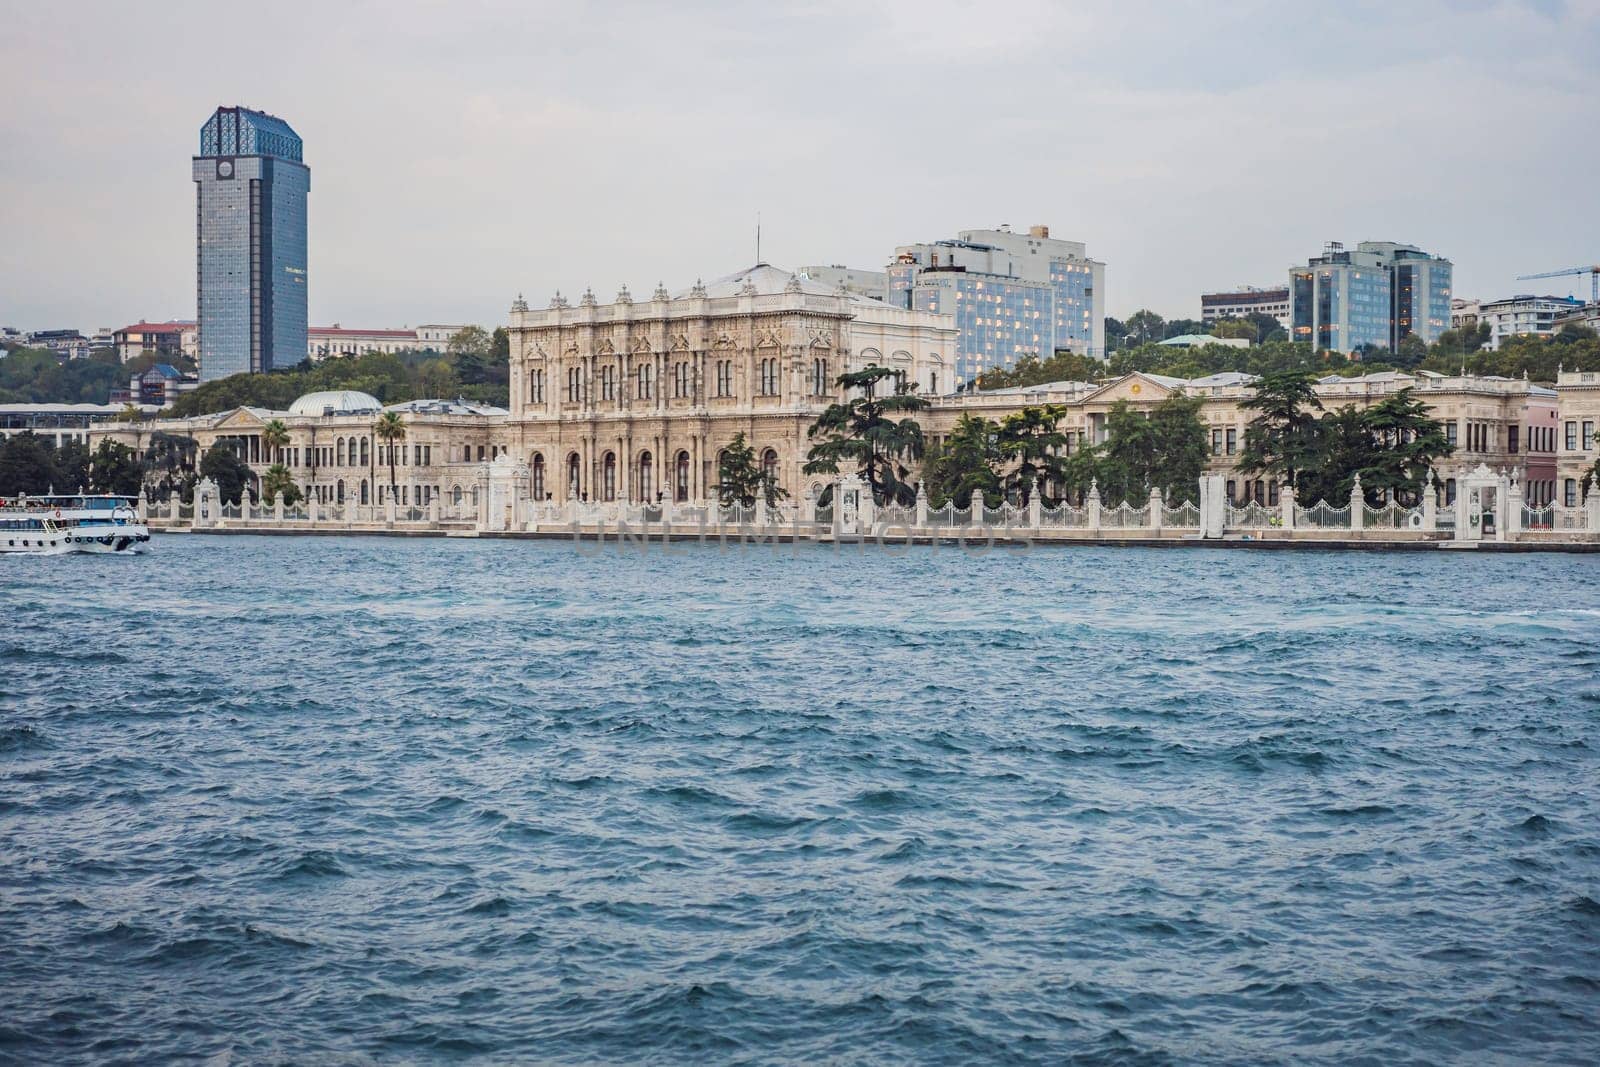 landscape scenery of Dolmabahce palacewith reflection, istanbul, turkey waterfront view from bosporus by galitskaya